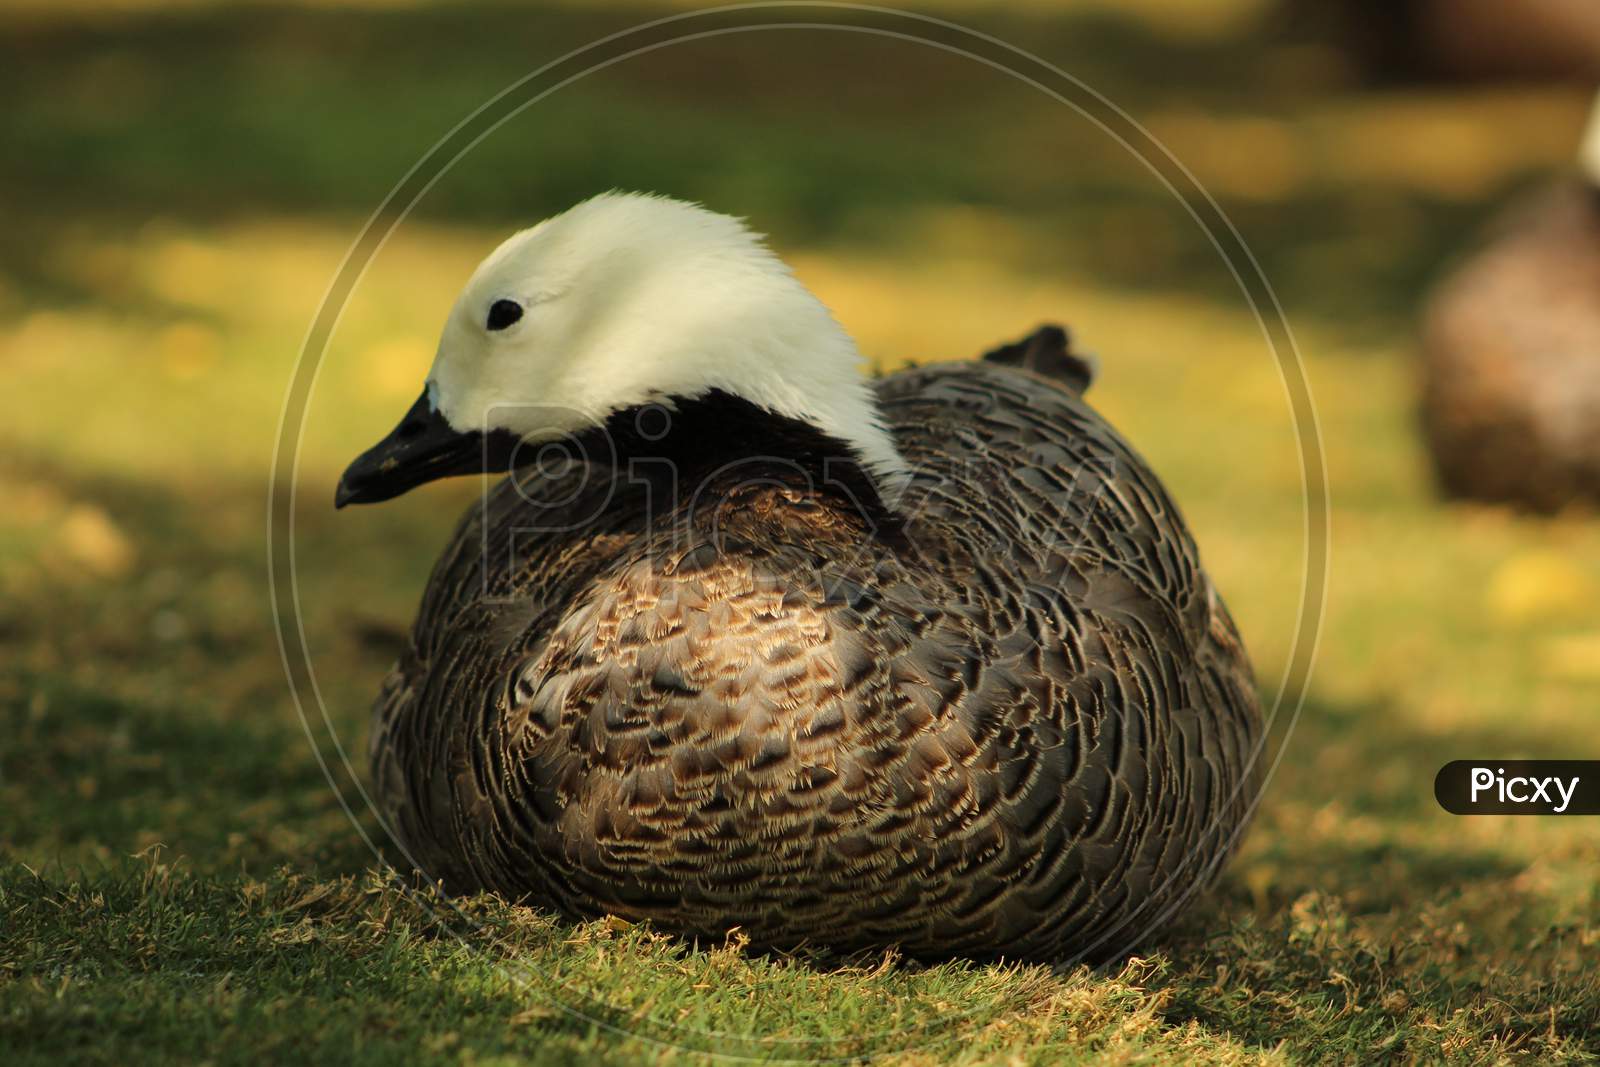 A beautiful duck sitting on the grass.